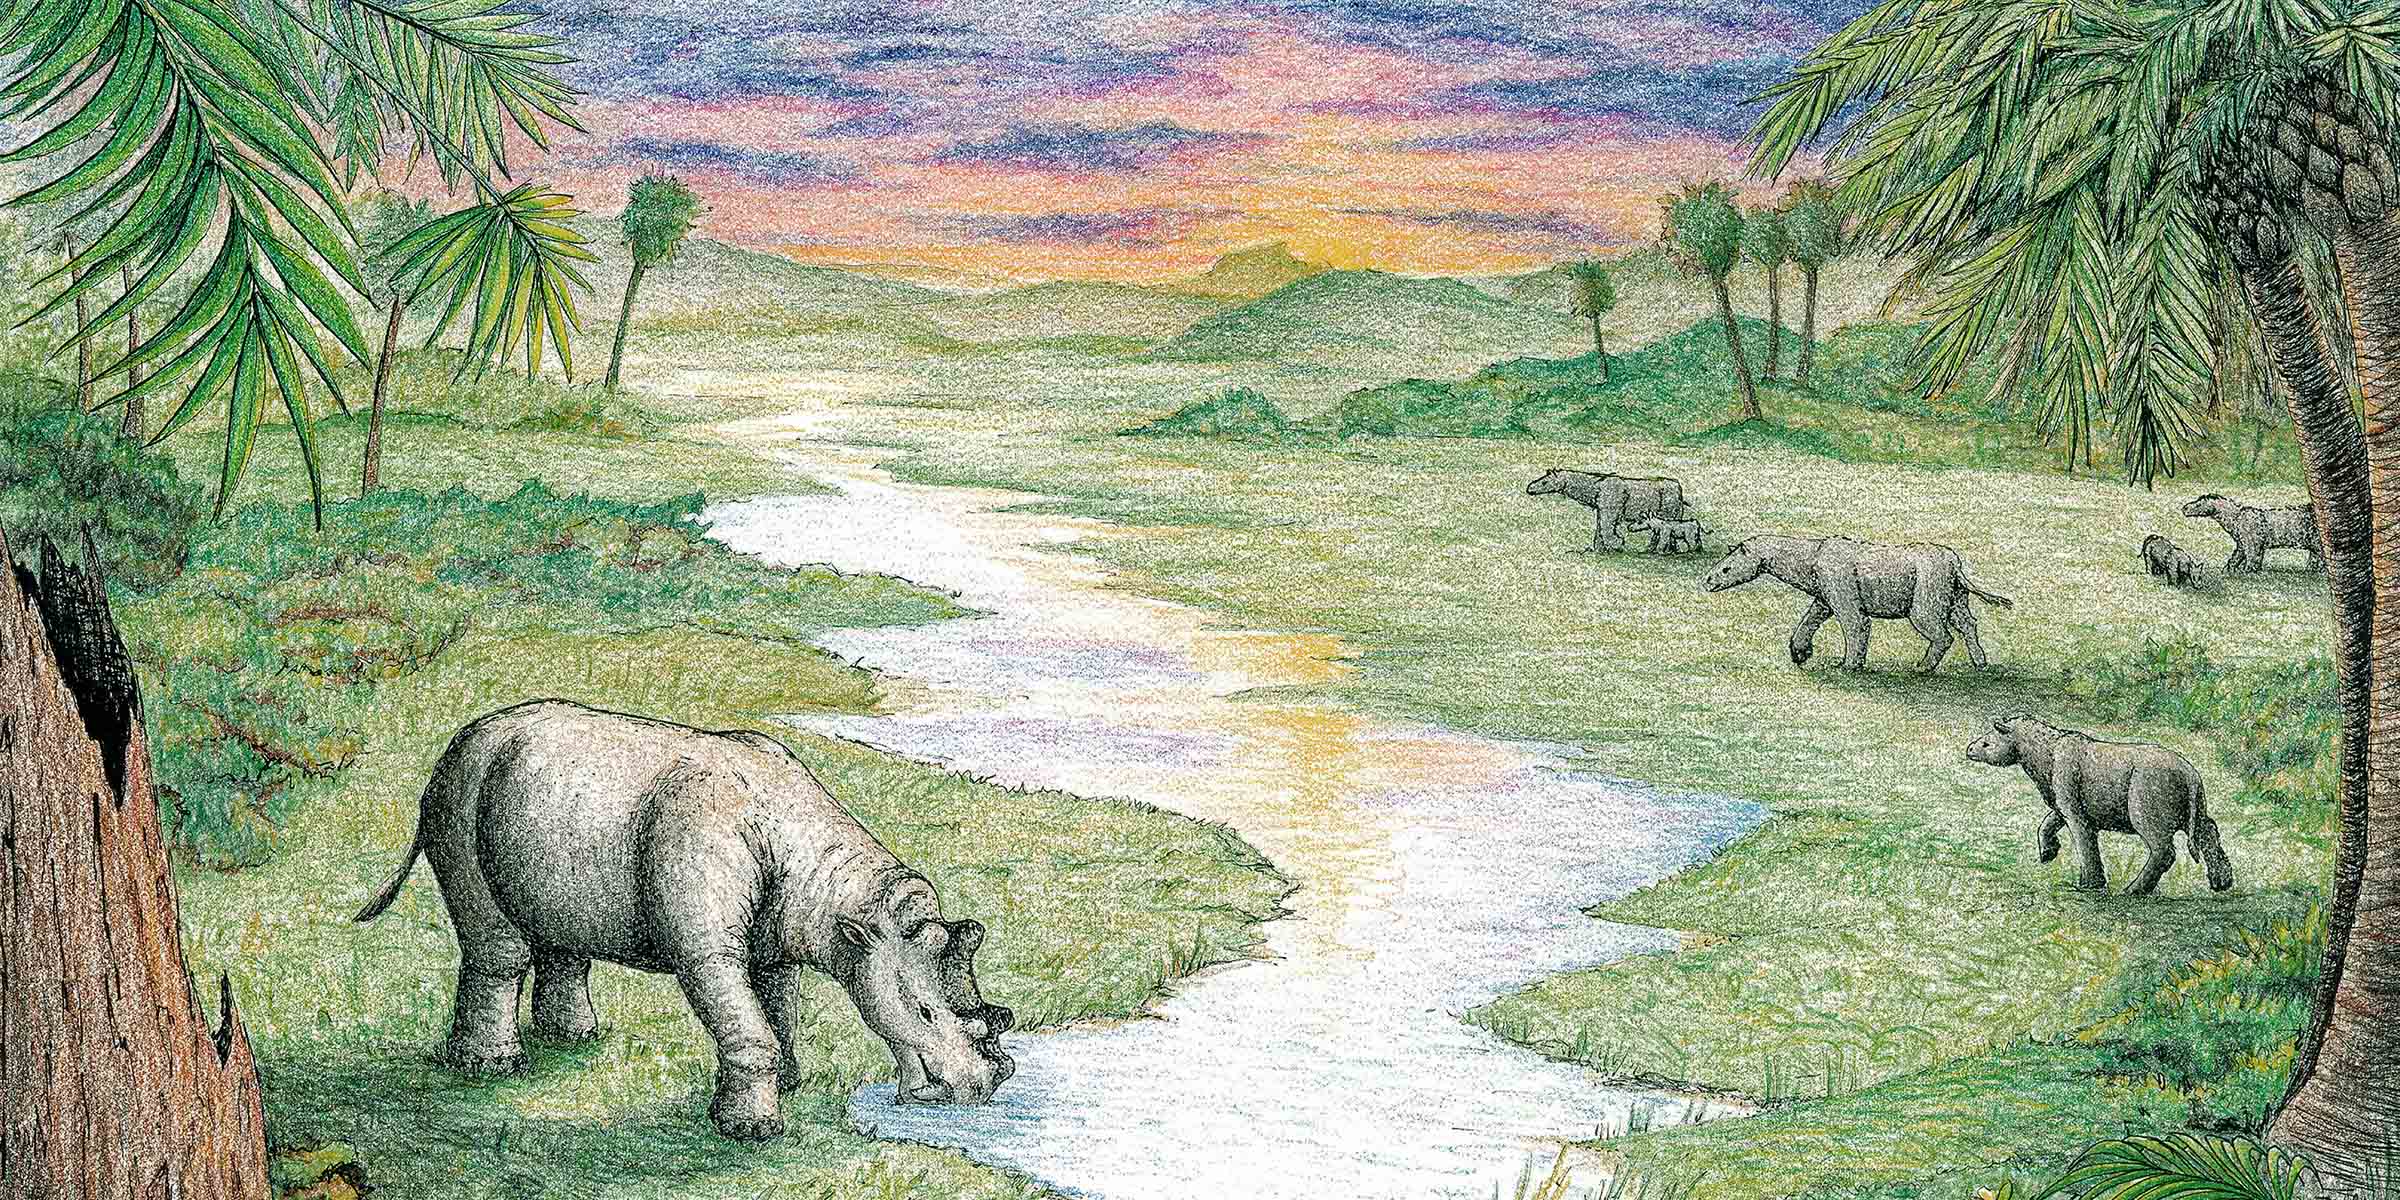 Colorful illustration of a landscape with palm trees, a stream, and rhino-like animals in front of a sunset